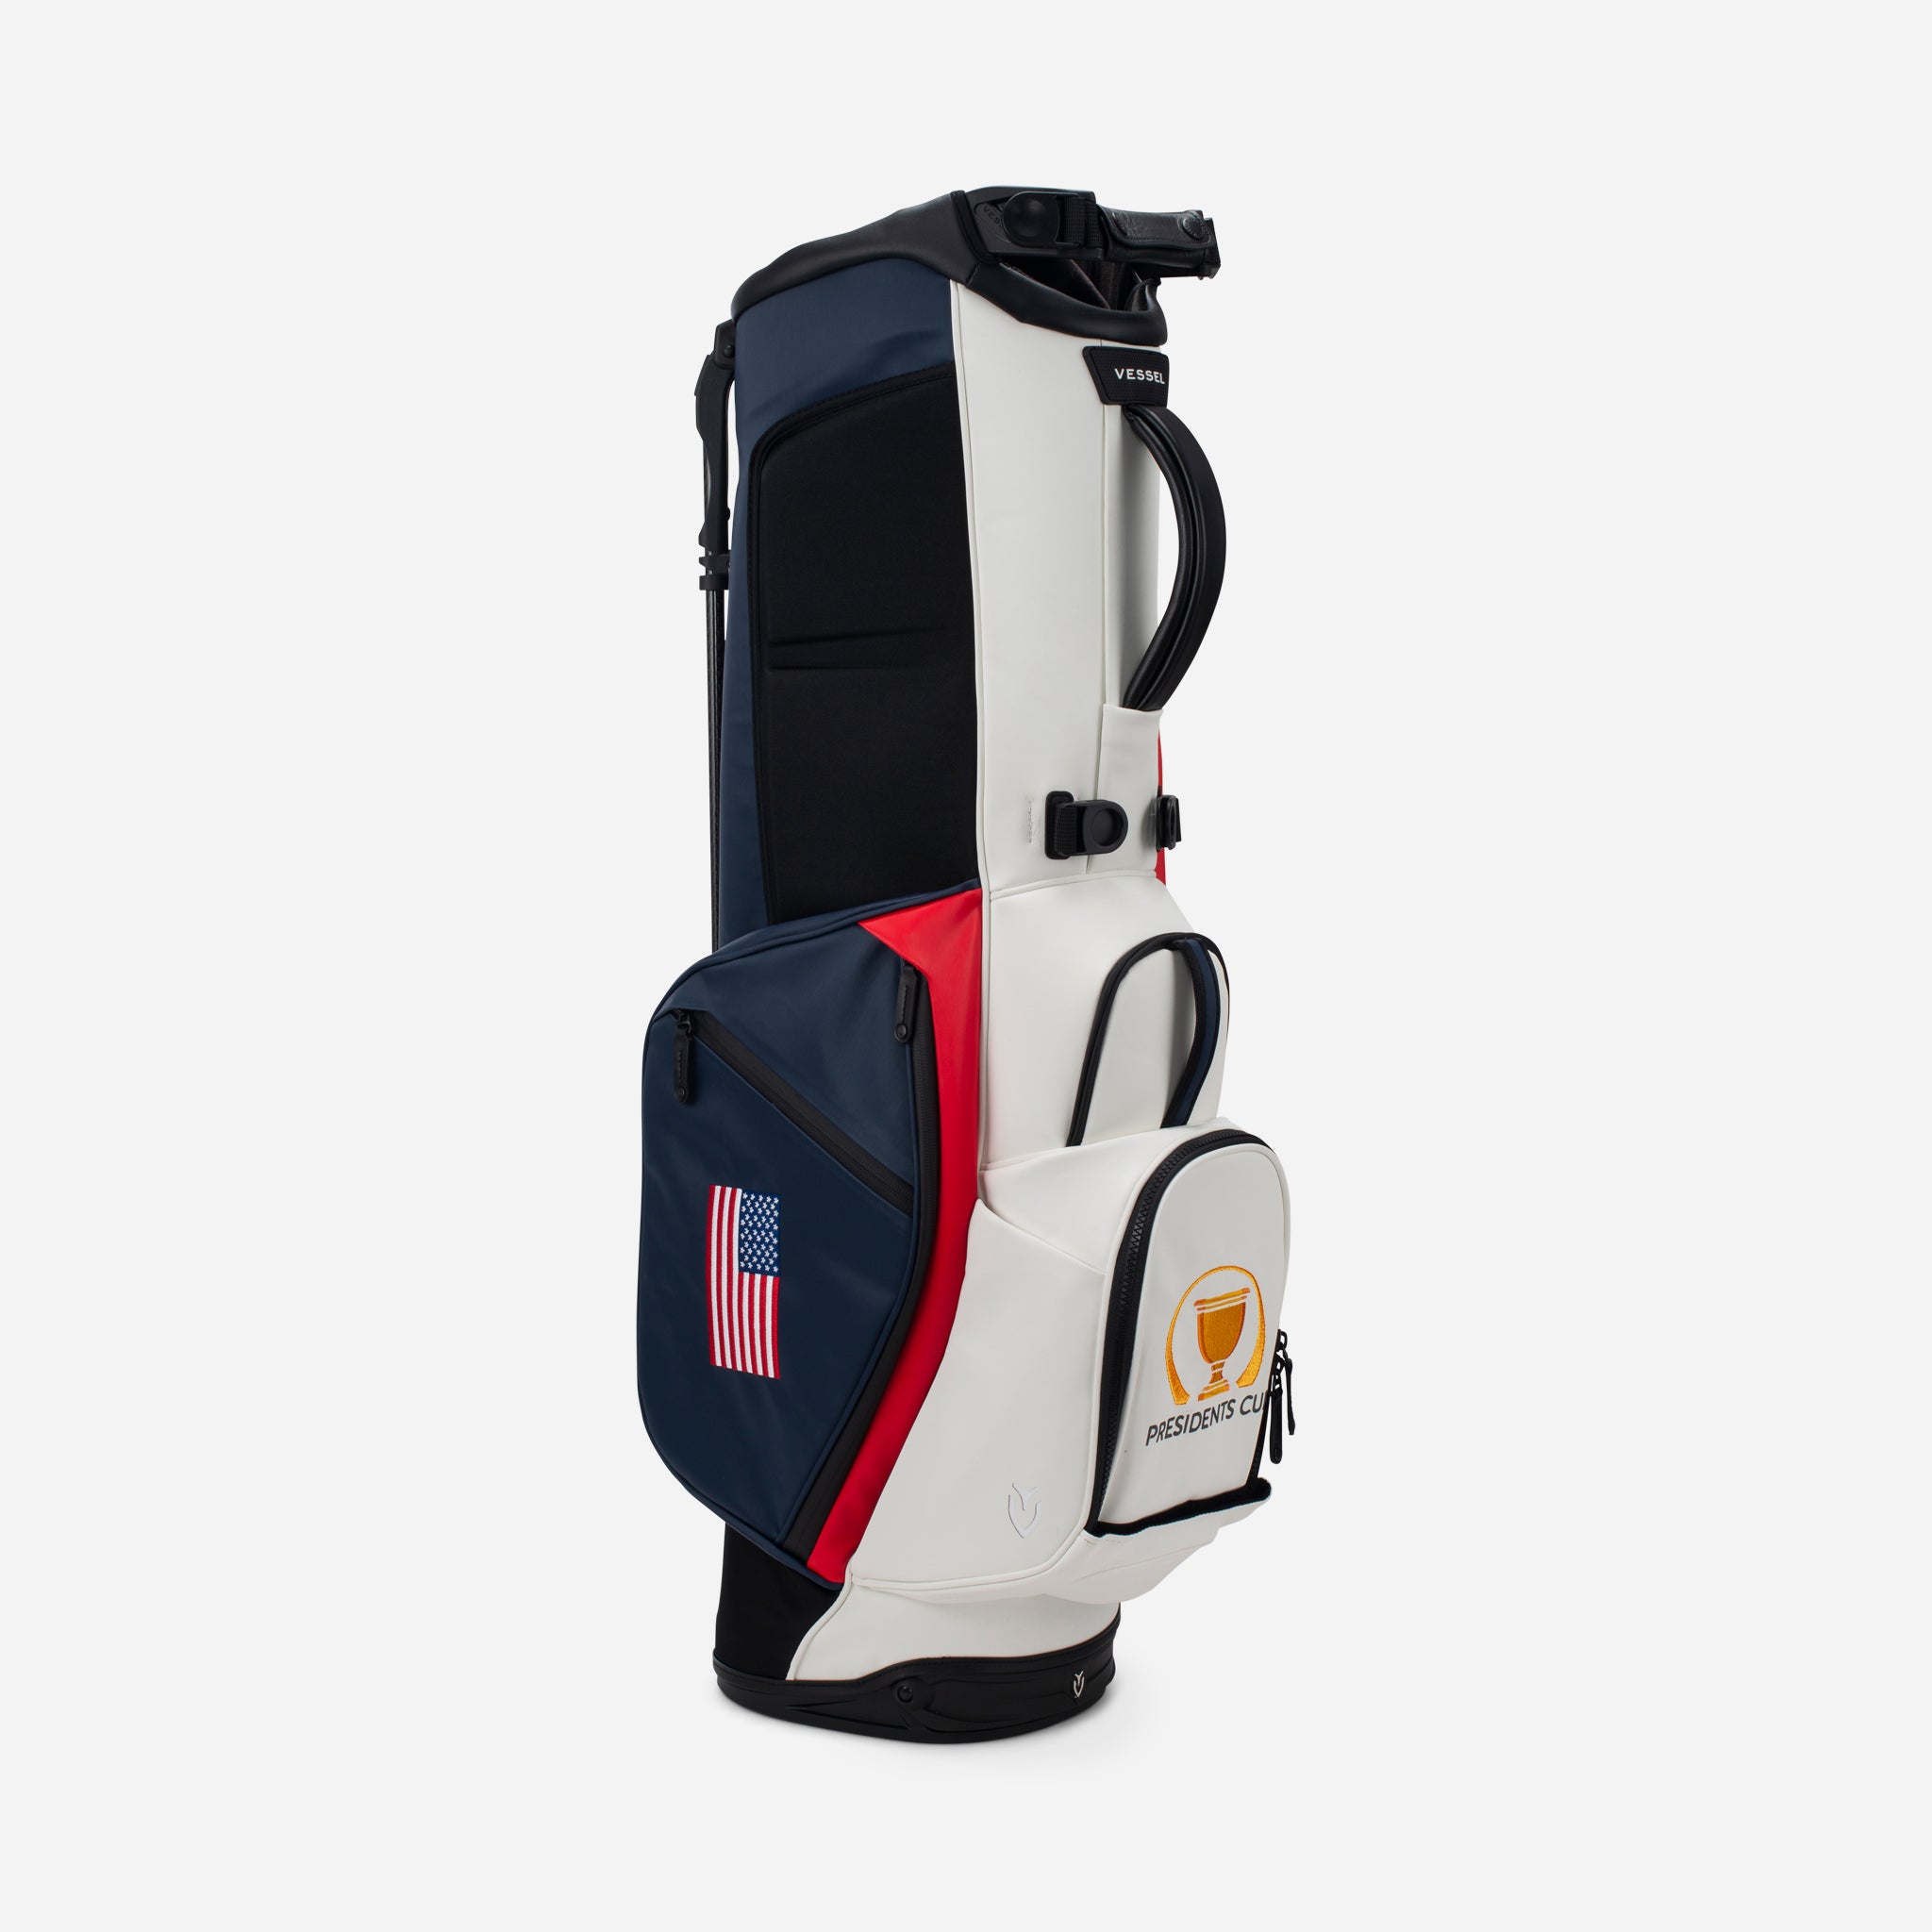 2022 Presidents Cup USA Golf Stand Bag Limited Edition Golf Bags